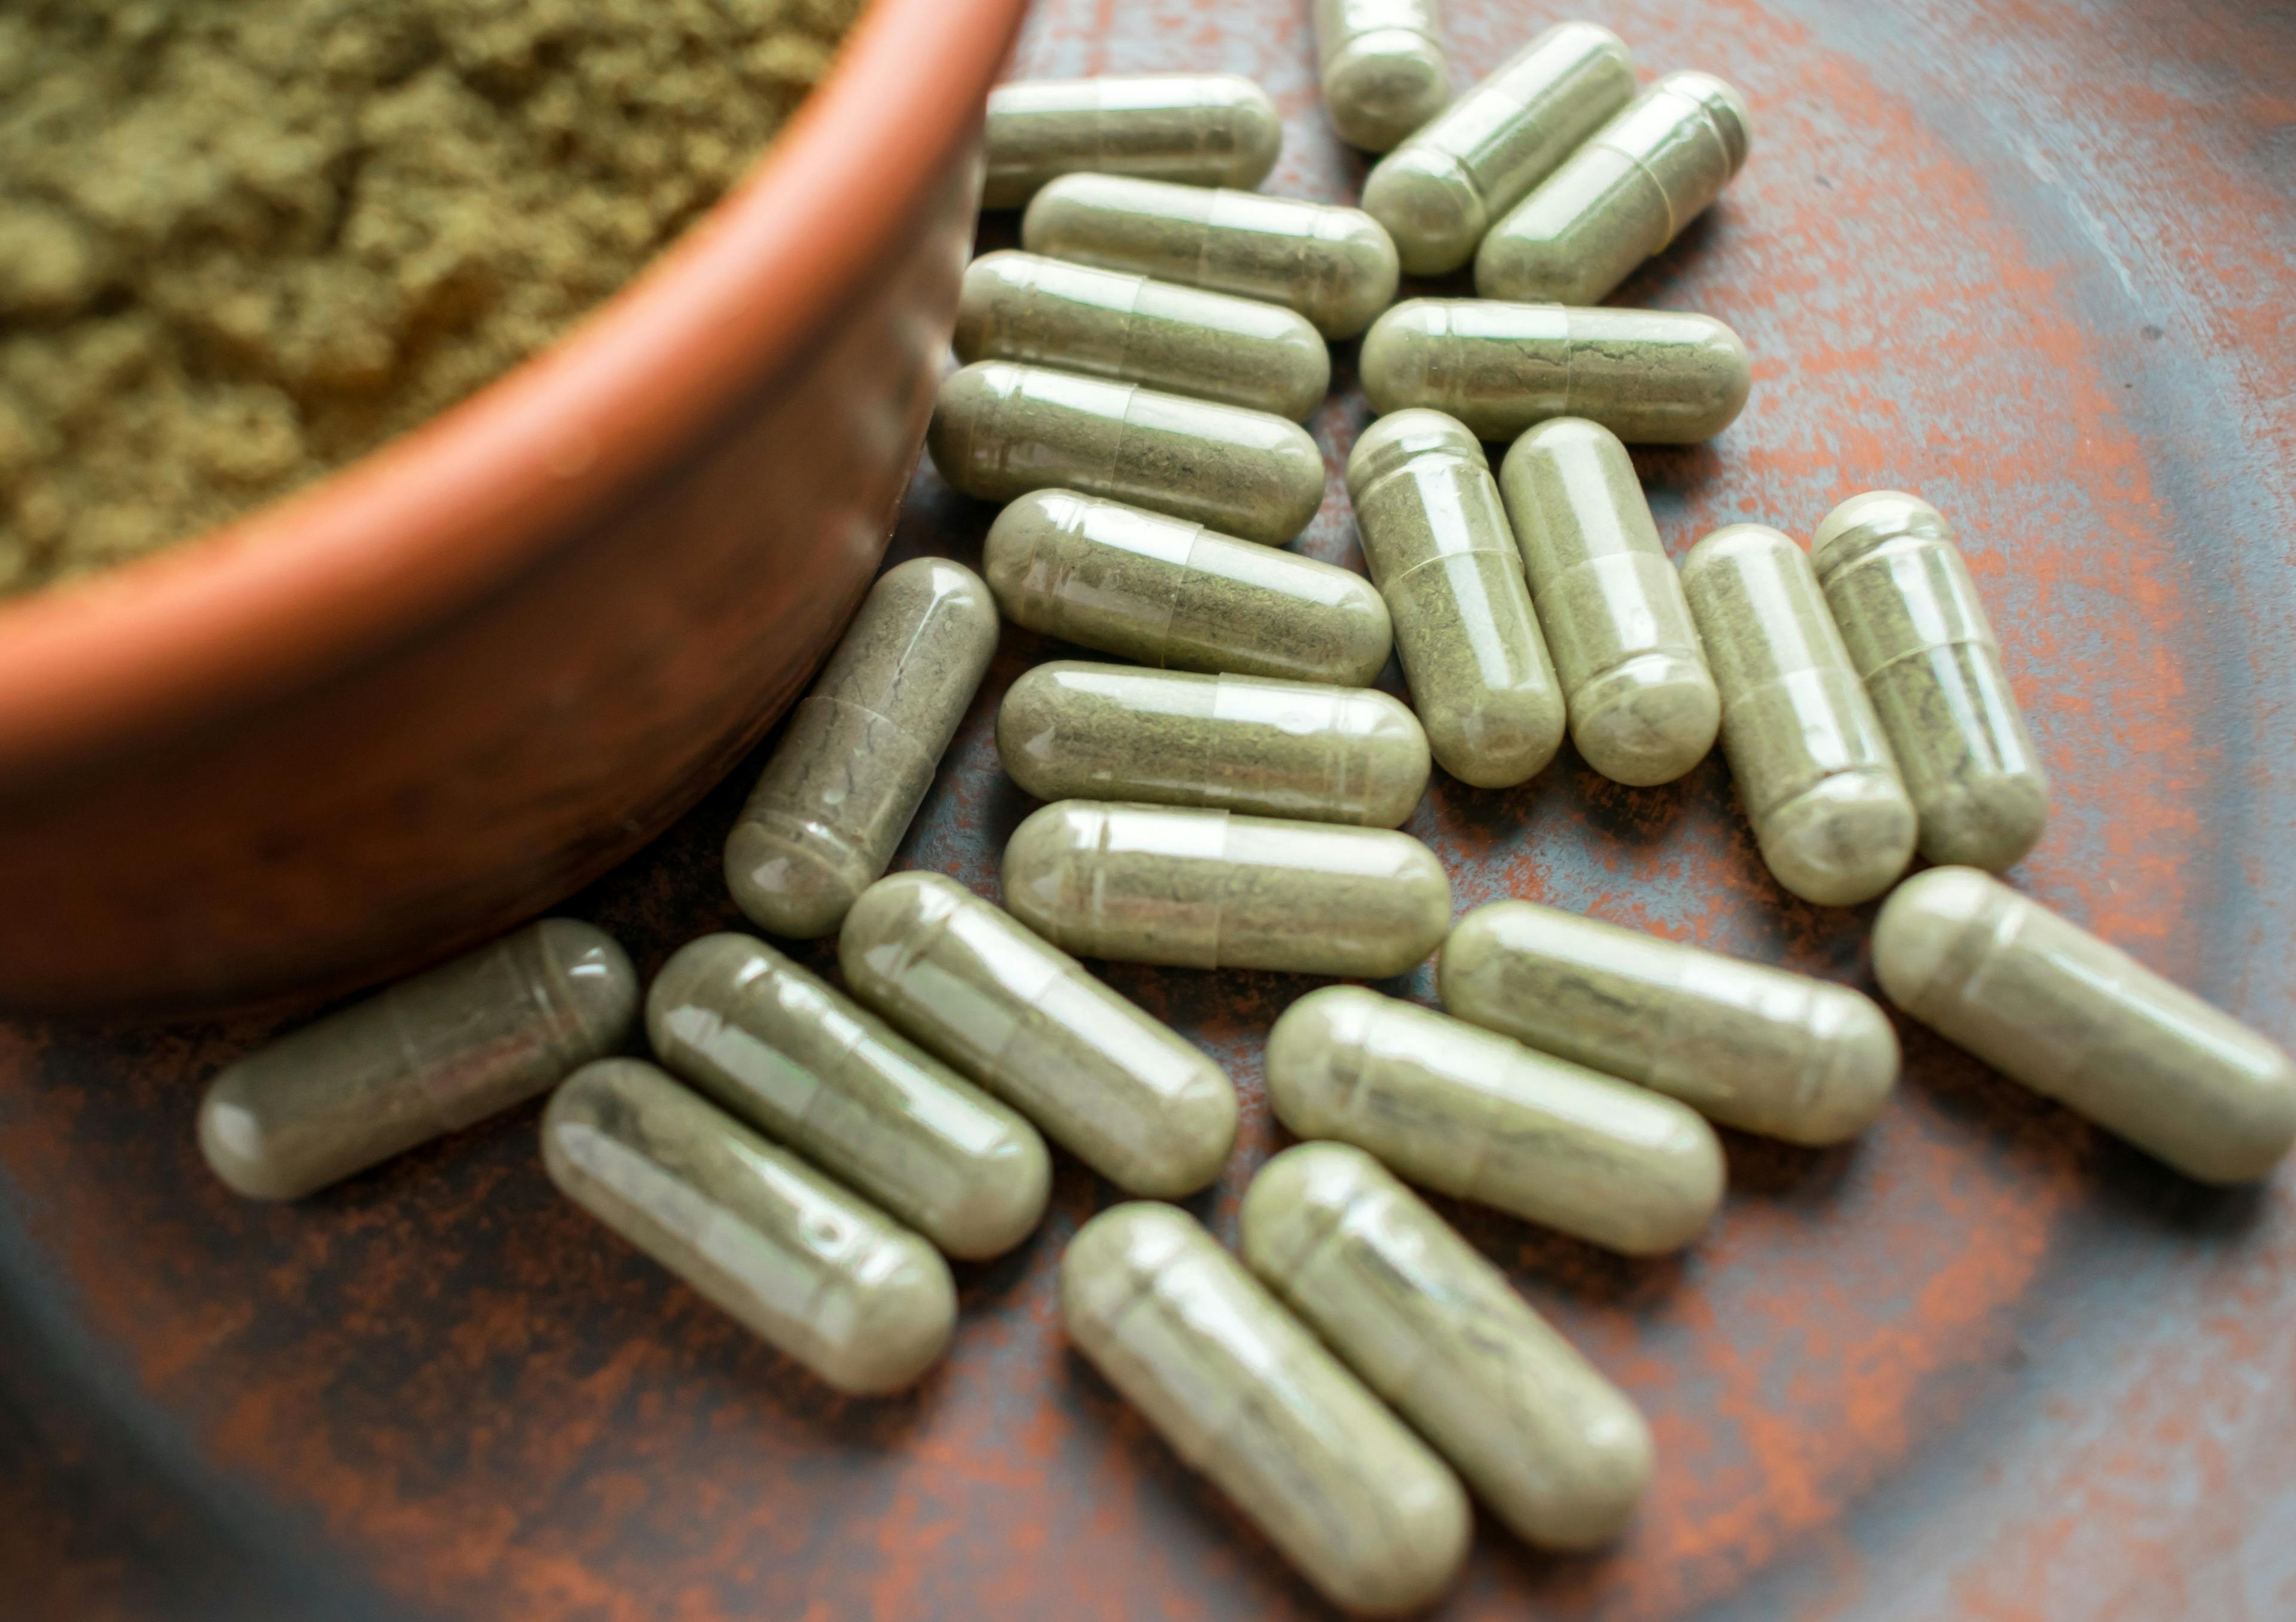 New Johns Hopkins Survey Finds Kratom May Have Low Abuse Potential